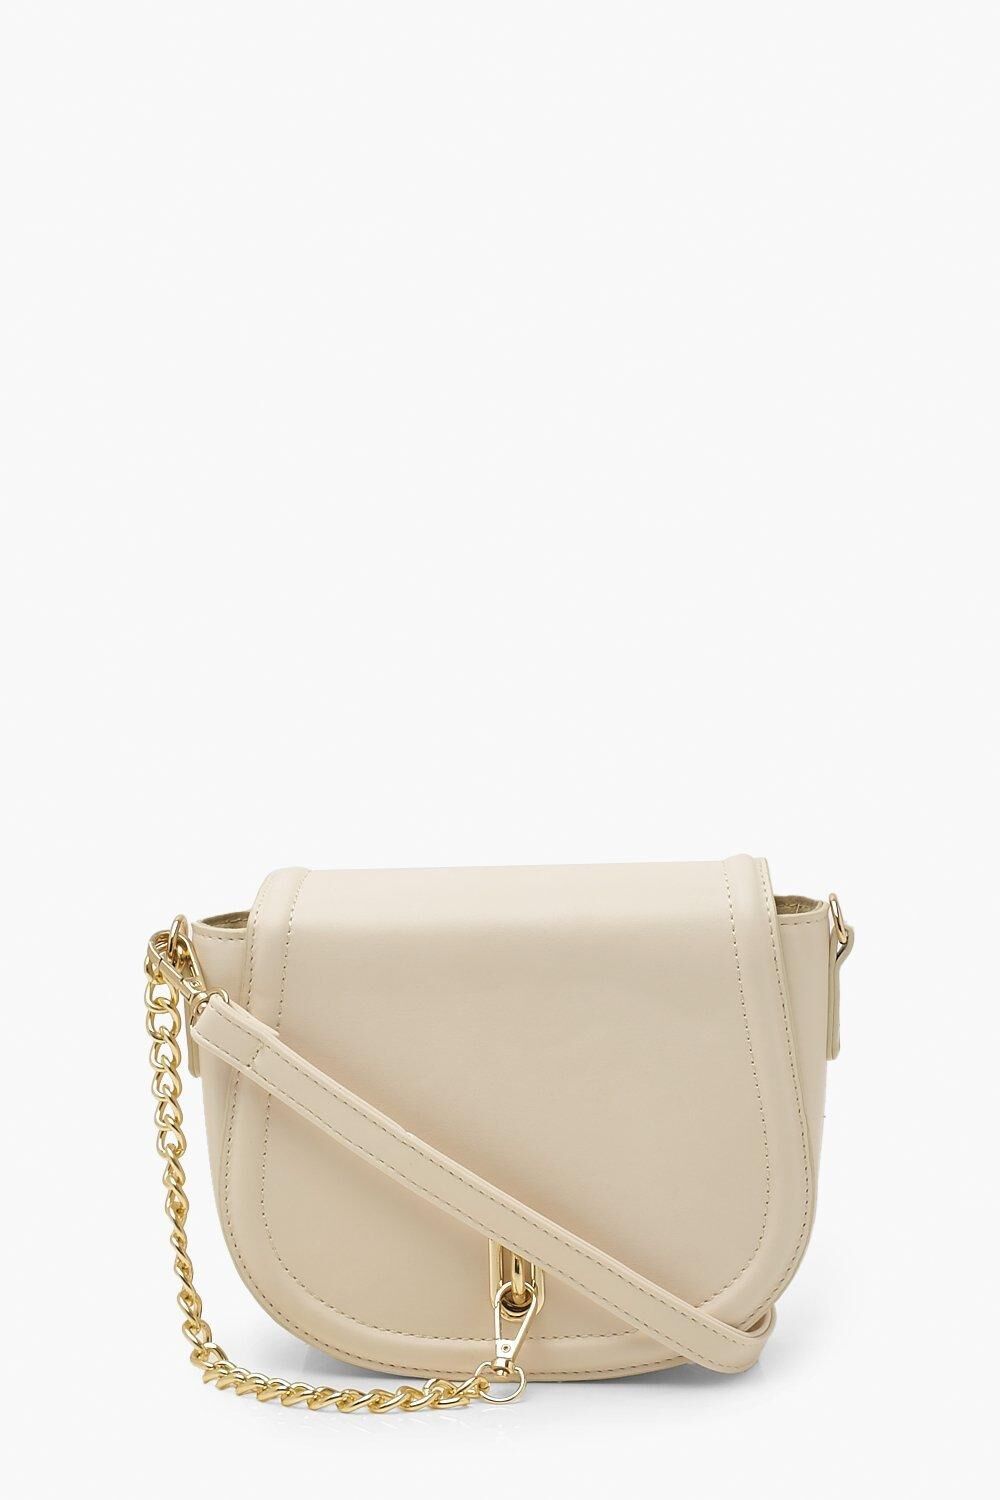 Boohoo Chain Detail Shoulder Bag- White  - Size: ONE SIZE